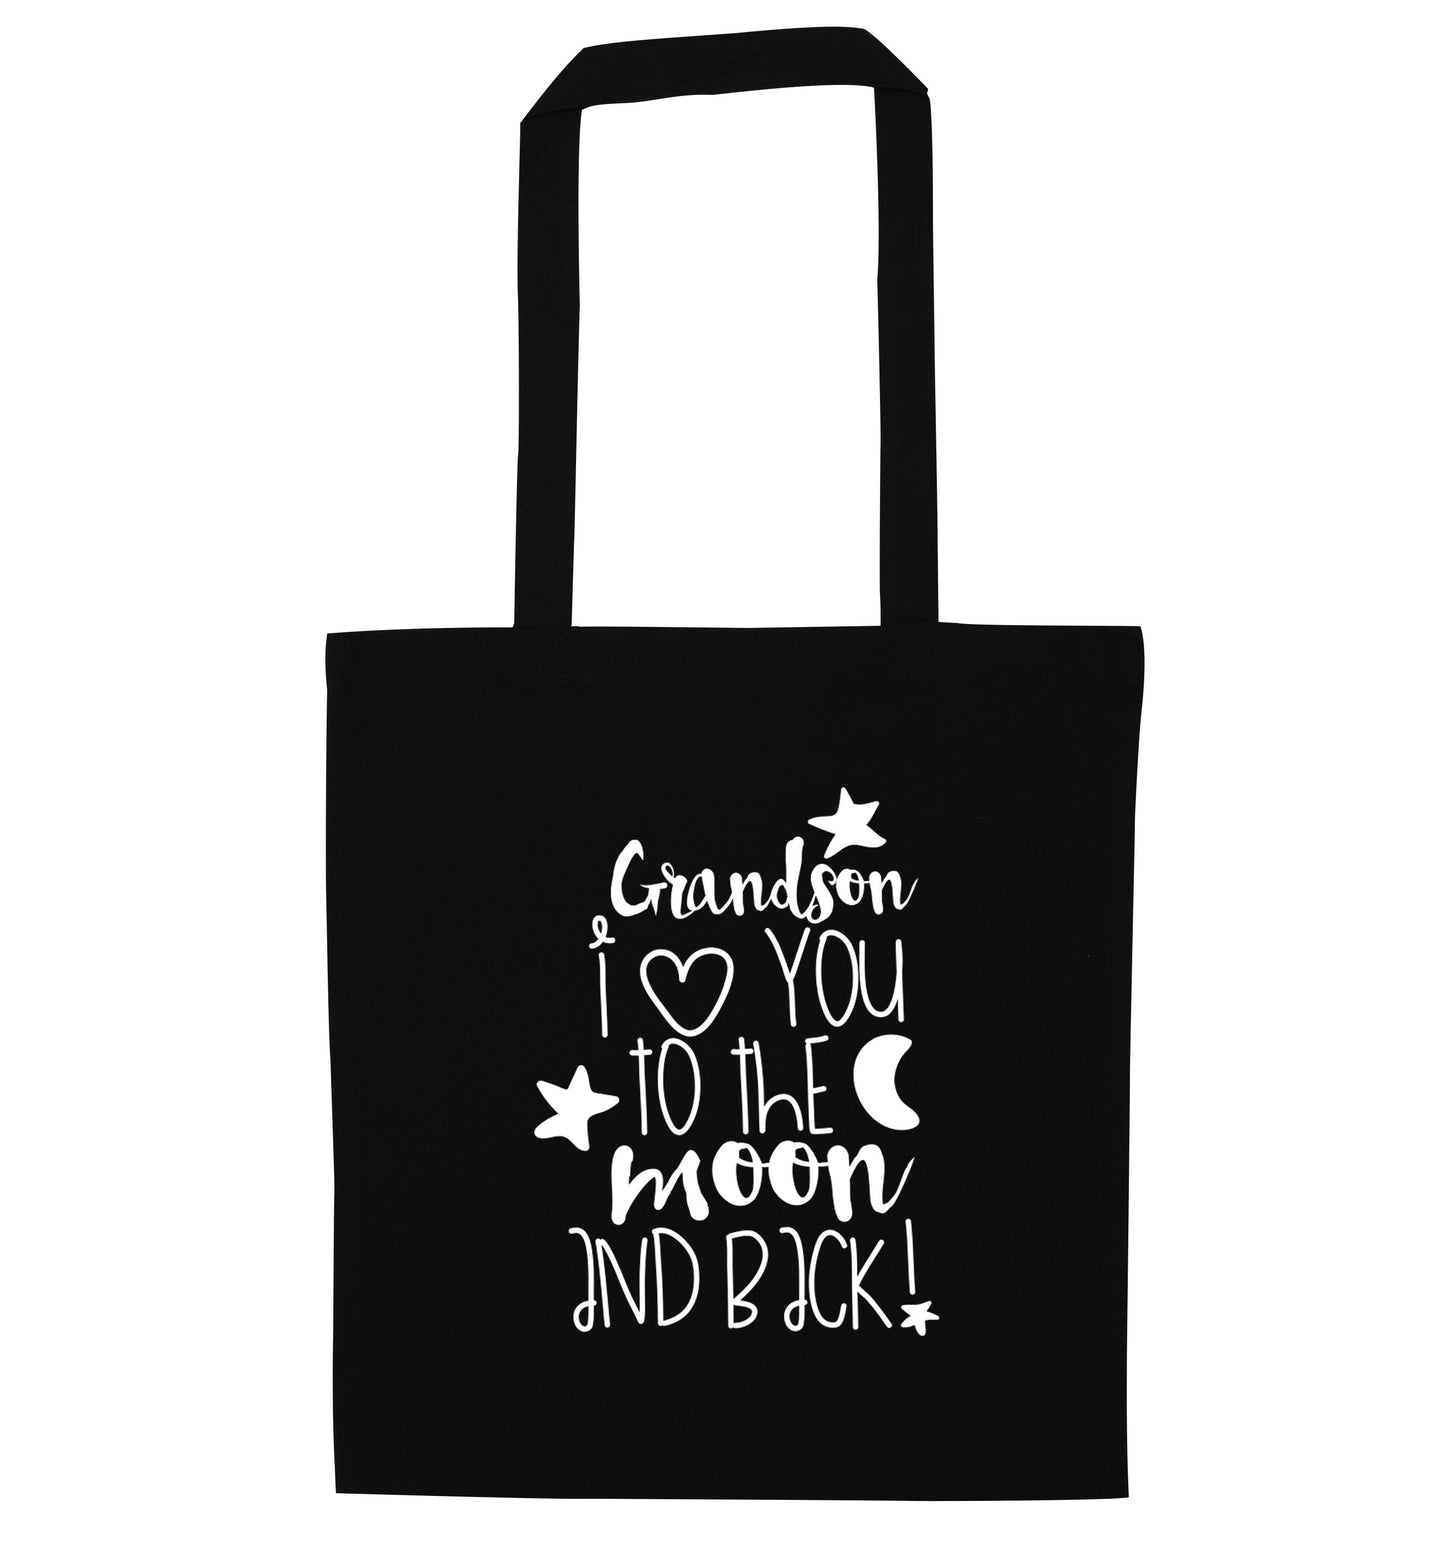 Grandson I love you to the moon and back black tote bag